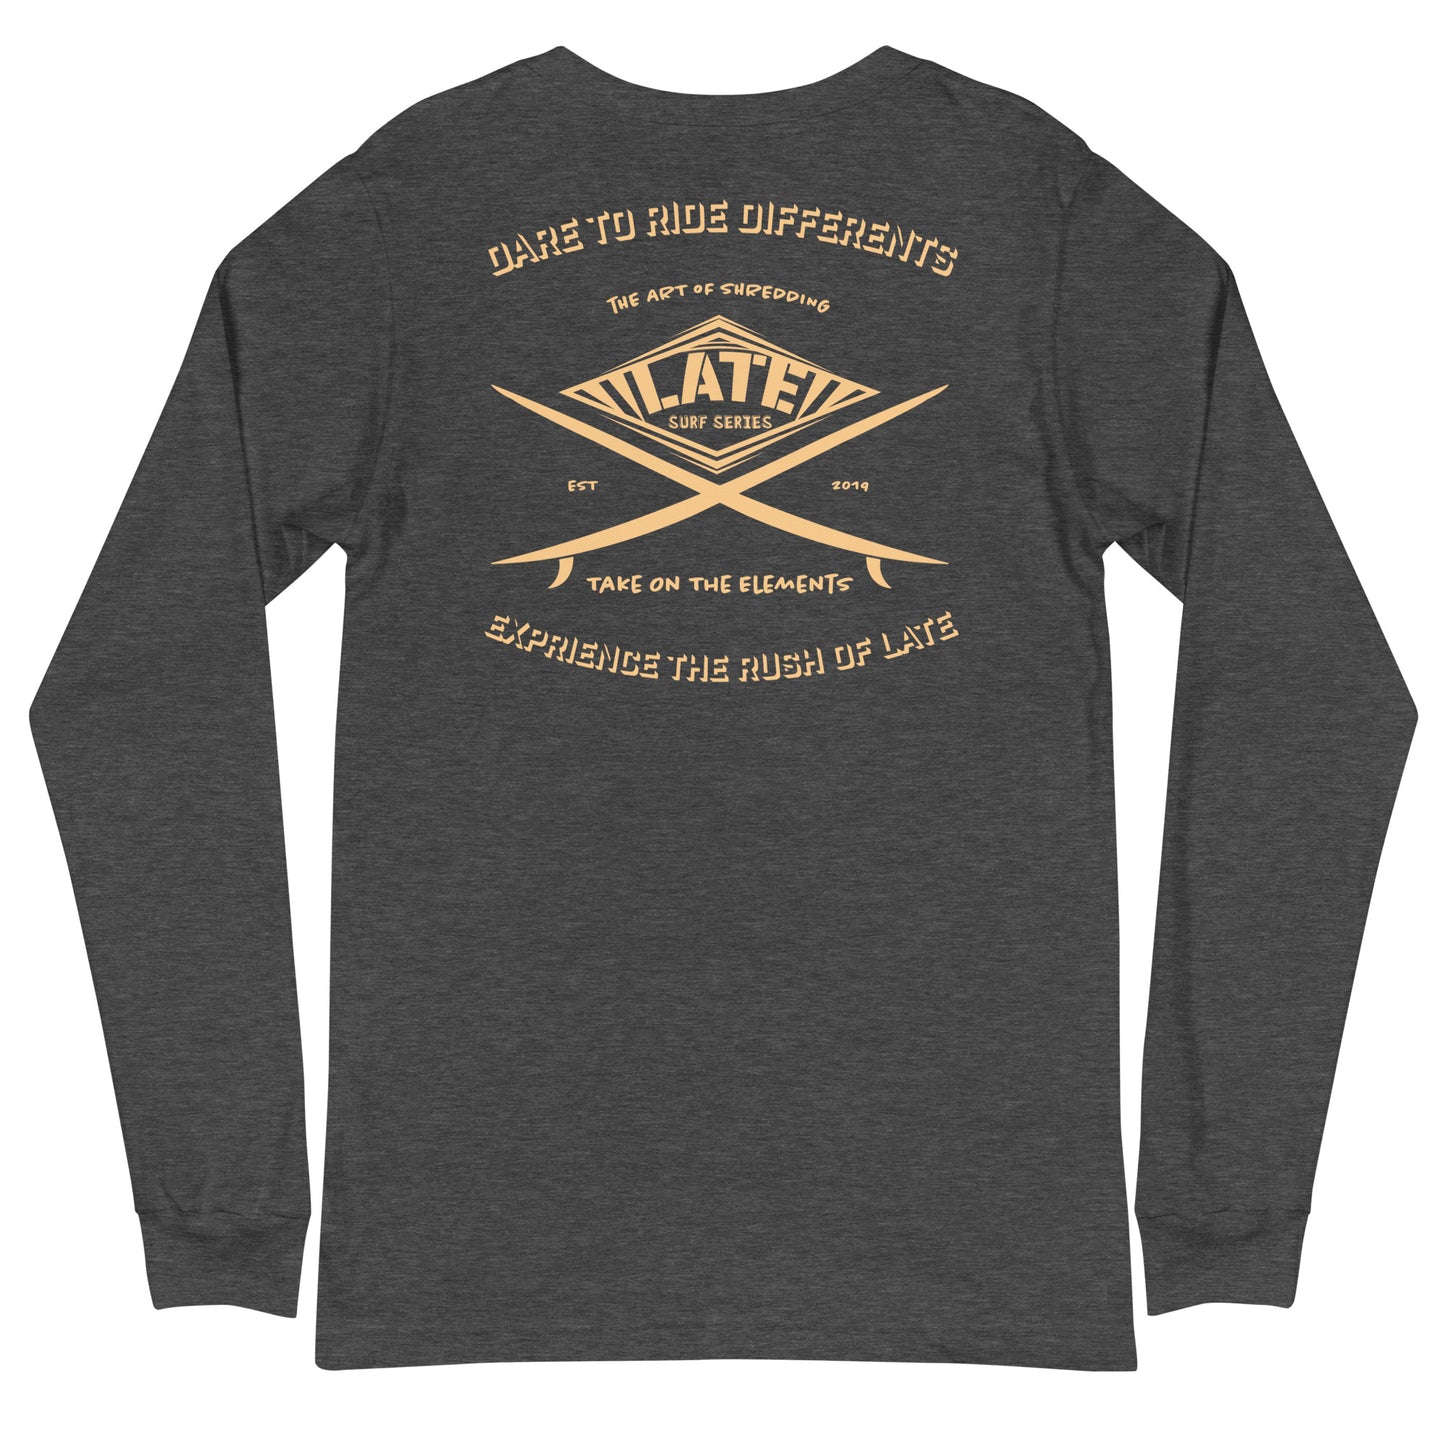 Long Sleeve surf vintage Take On The Elements Logo Late surf series, texte dare to ride differents couleur gris foncé